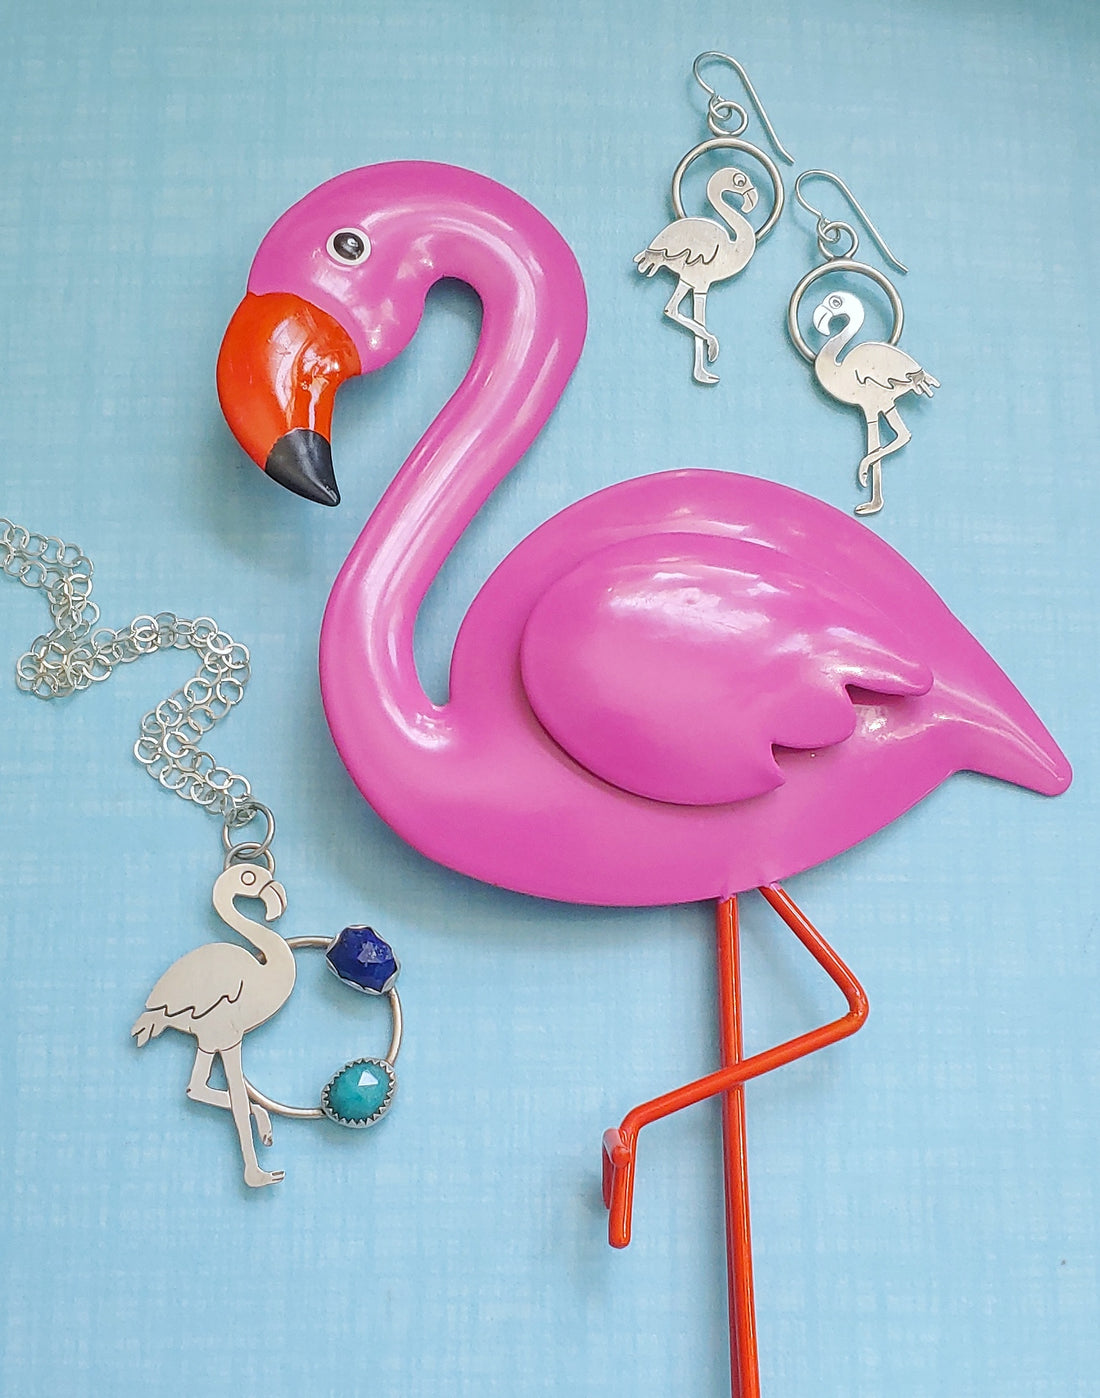 Michael's pink flamingo and sterling silver and gemstone flamingo necklace and earrings